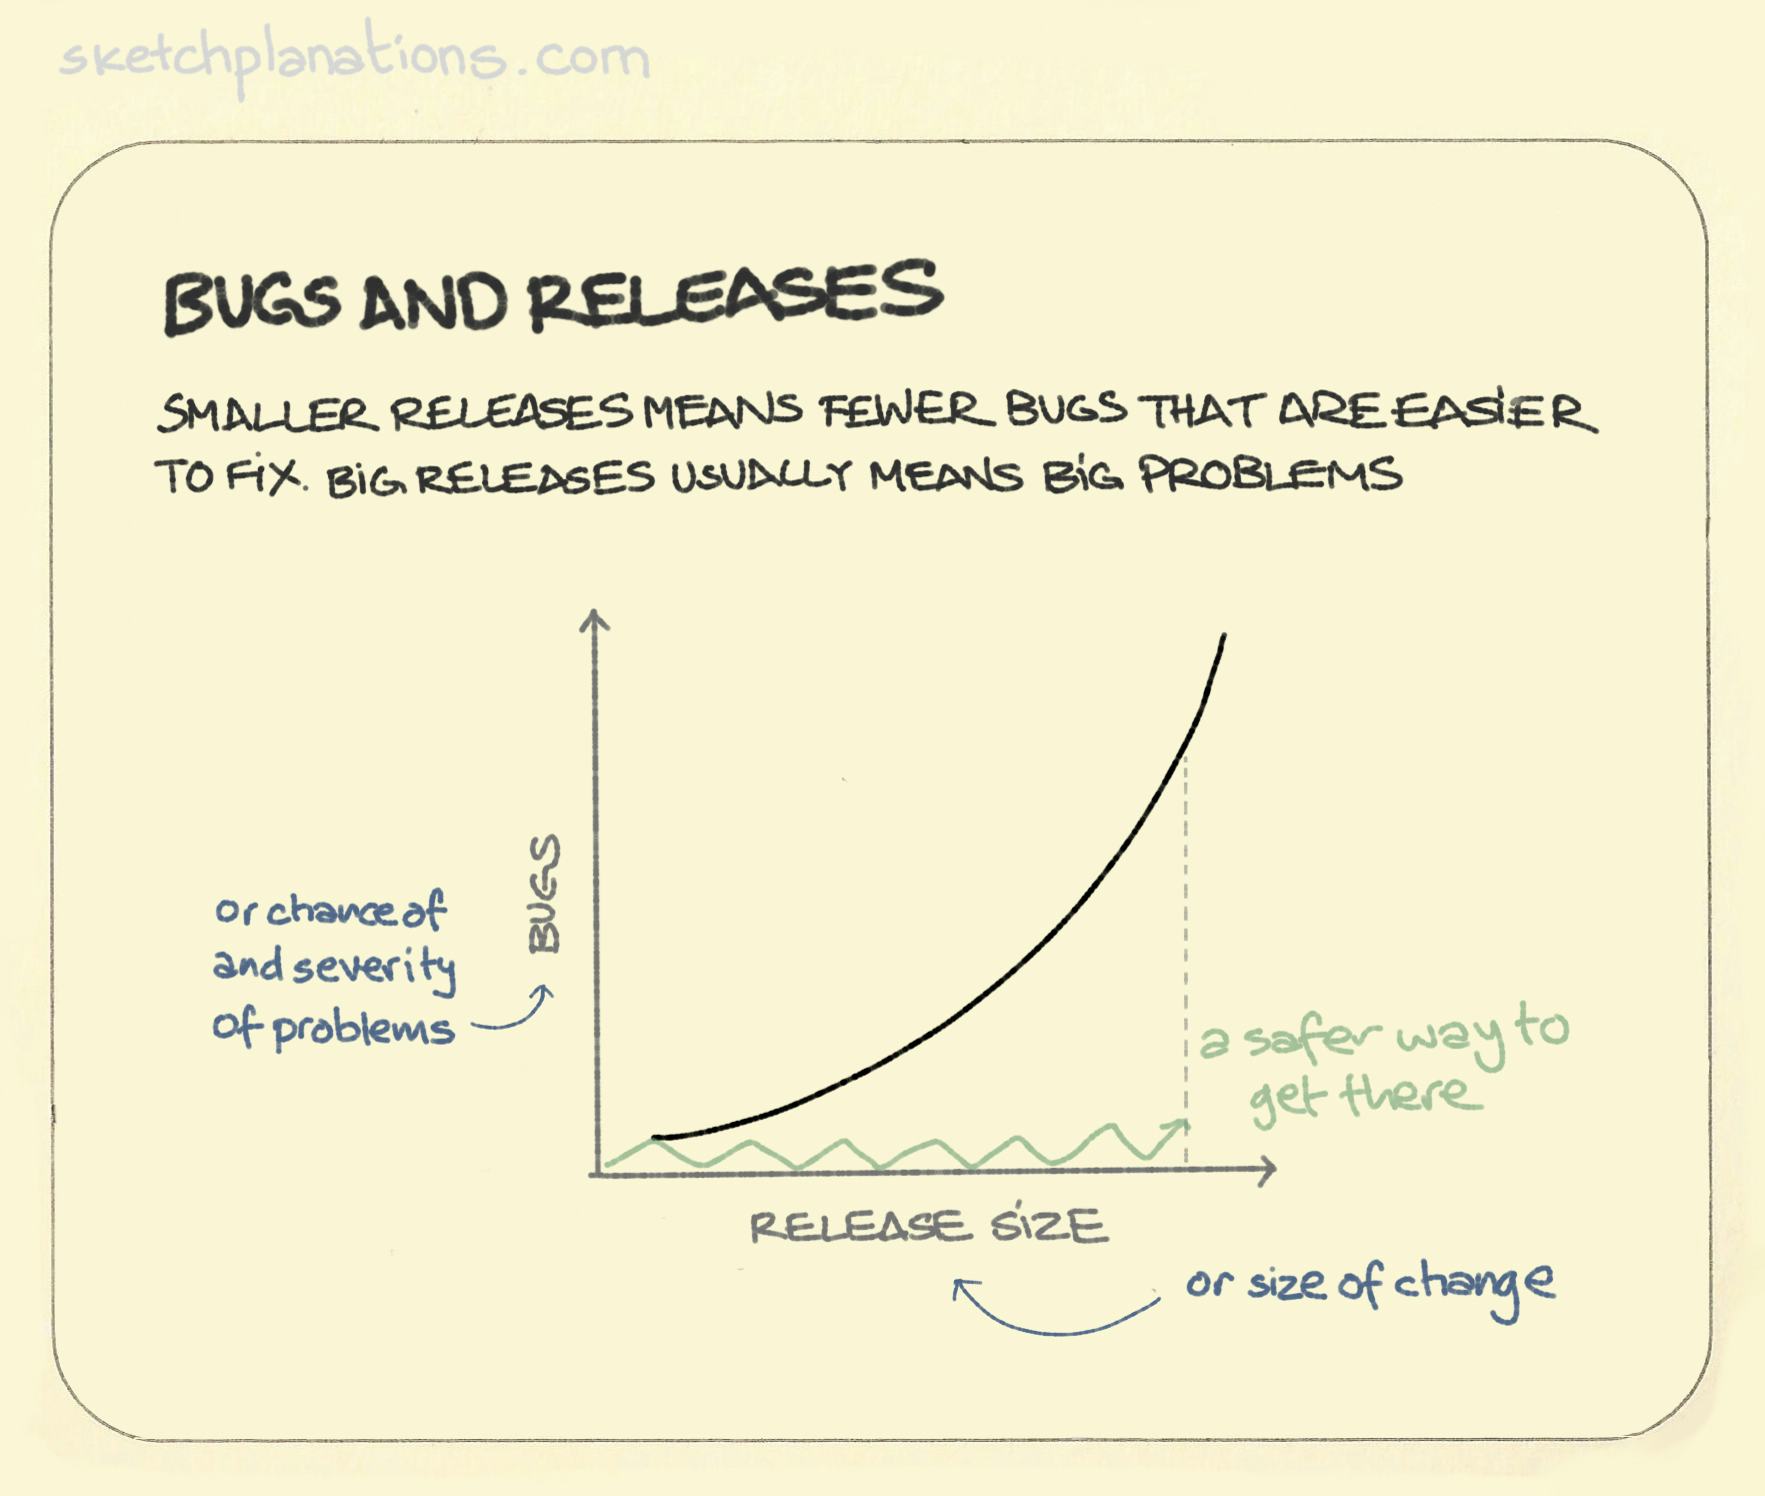 Bugs and releases - Sketchplanations